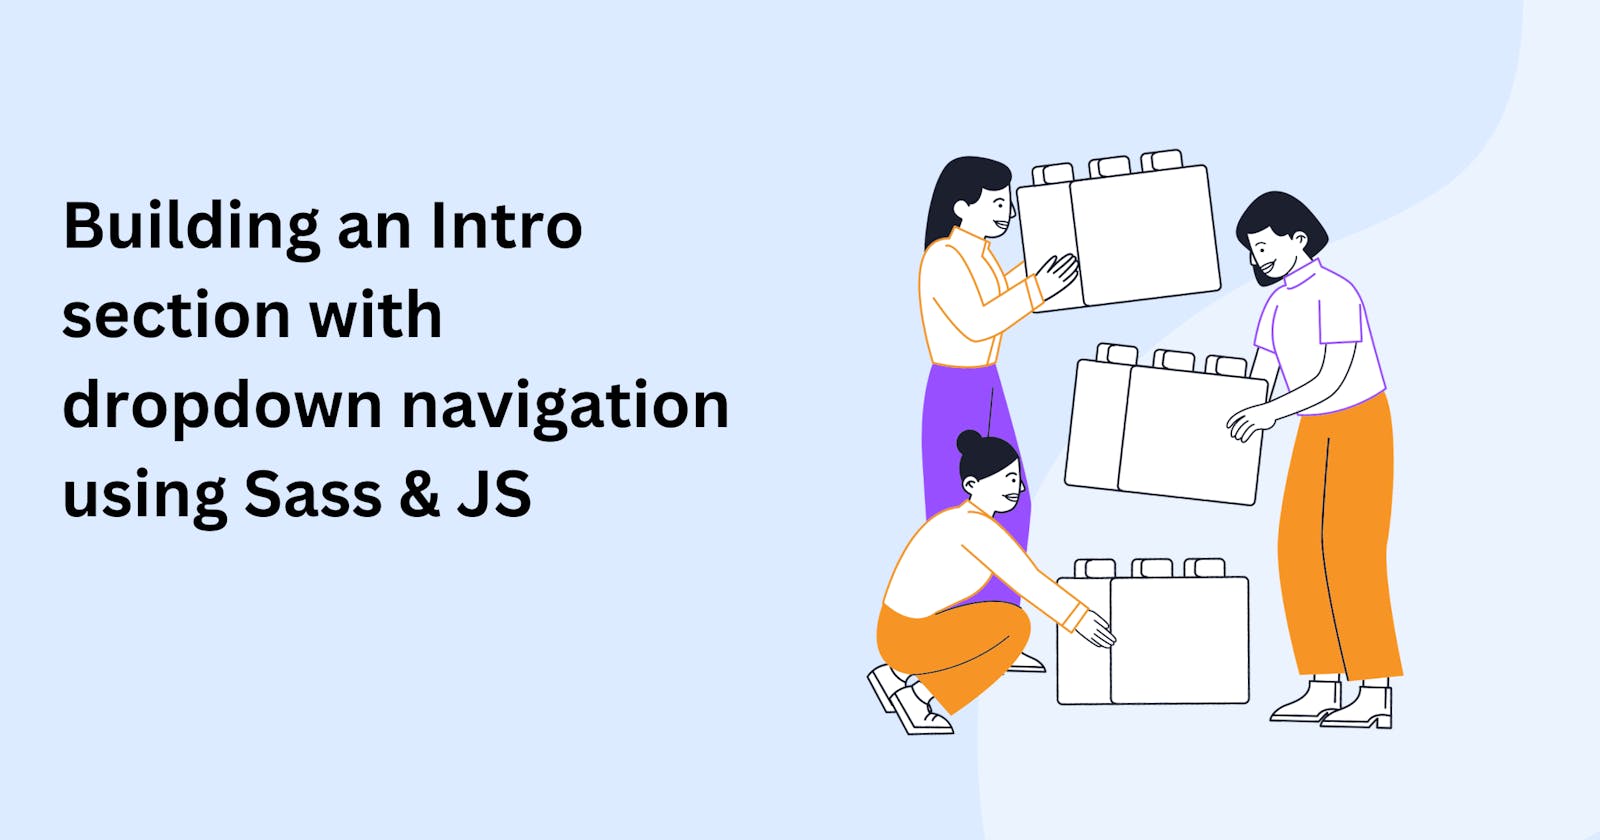 Building an Intro section with dropdown navigation using Sass & JS